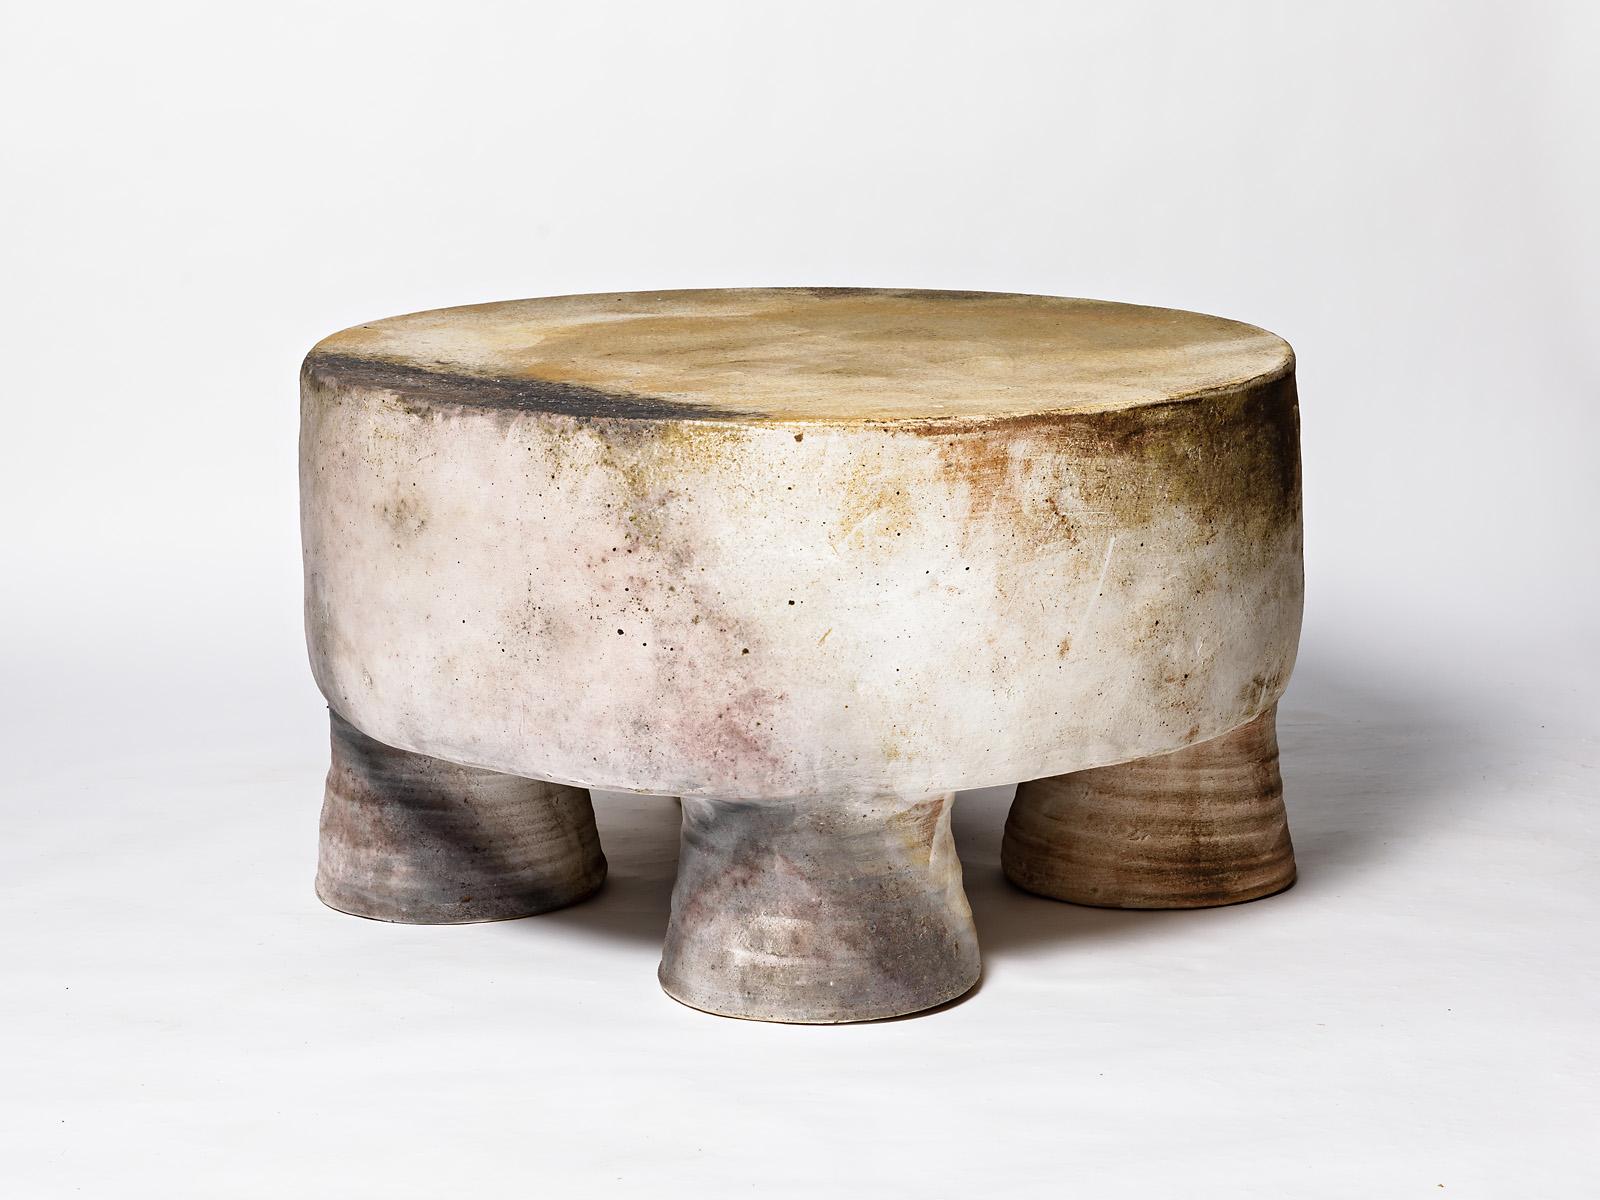 Contemporary Unique and Exceptionnel Coffee Table by Mia Jensen, Wood Firing, 2022